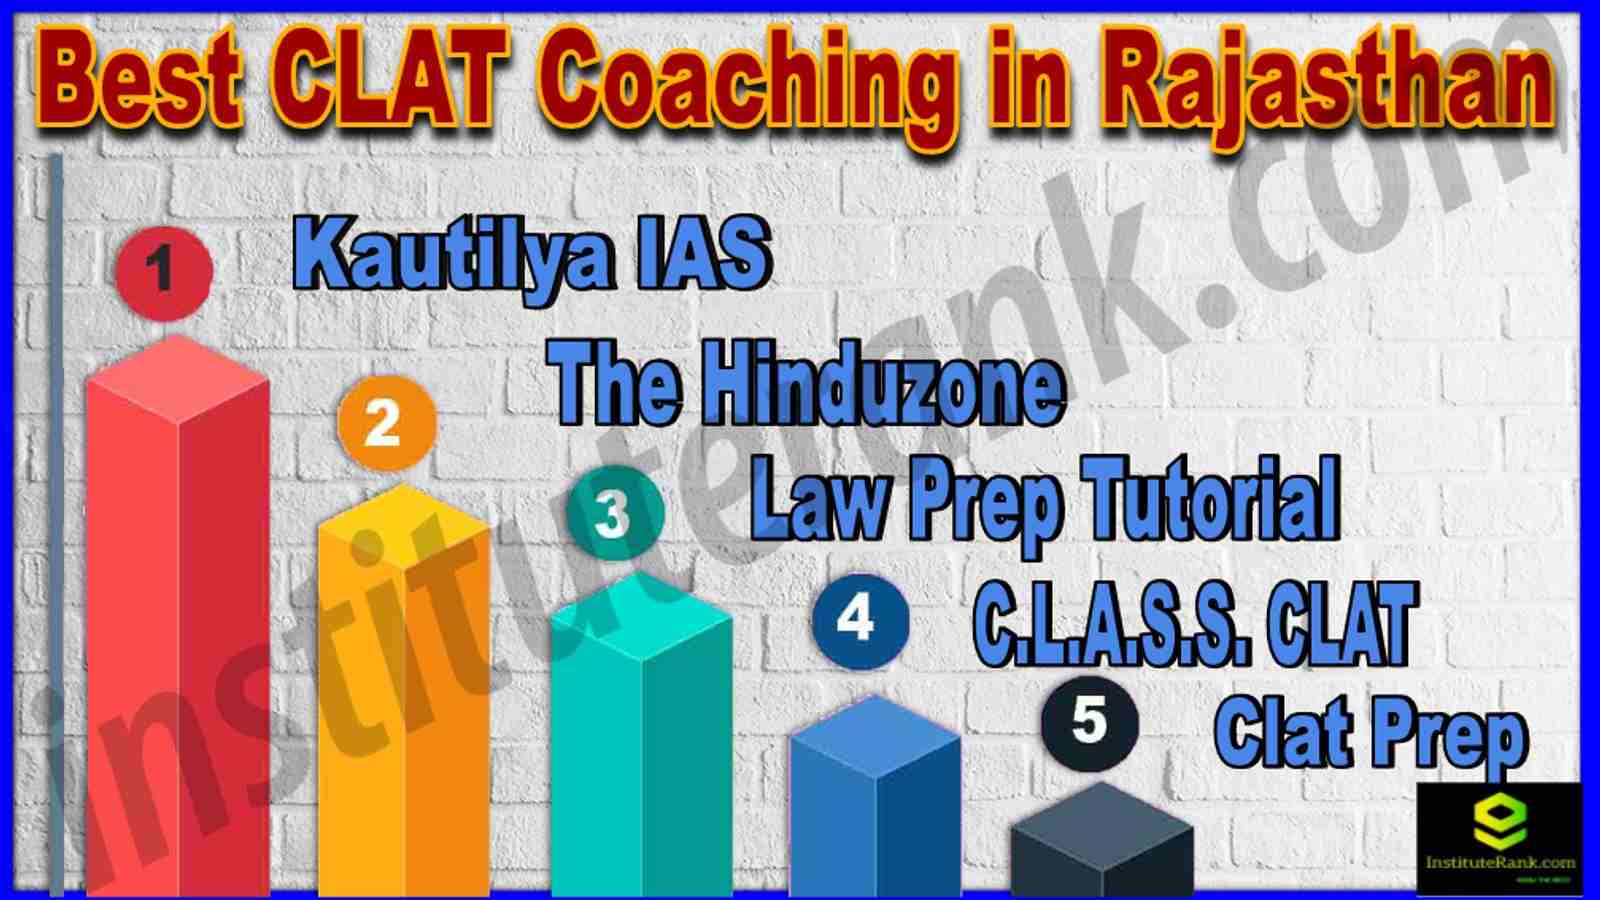 Best CLAT Coaching in Rajasthan